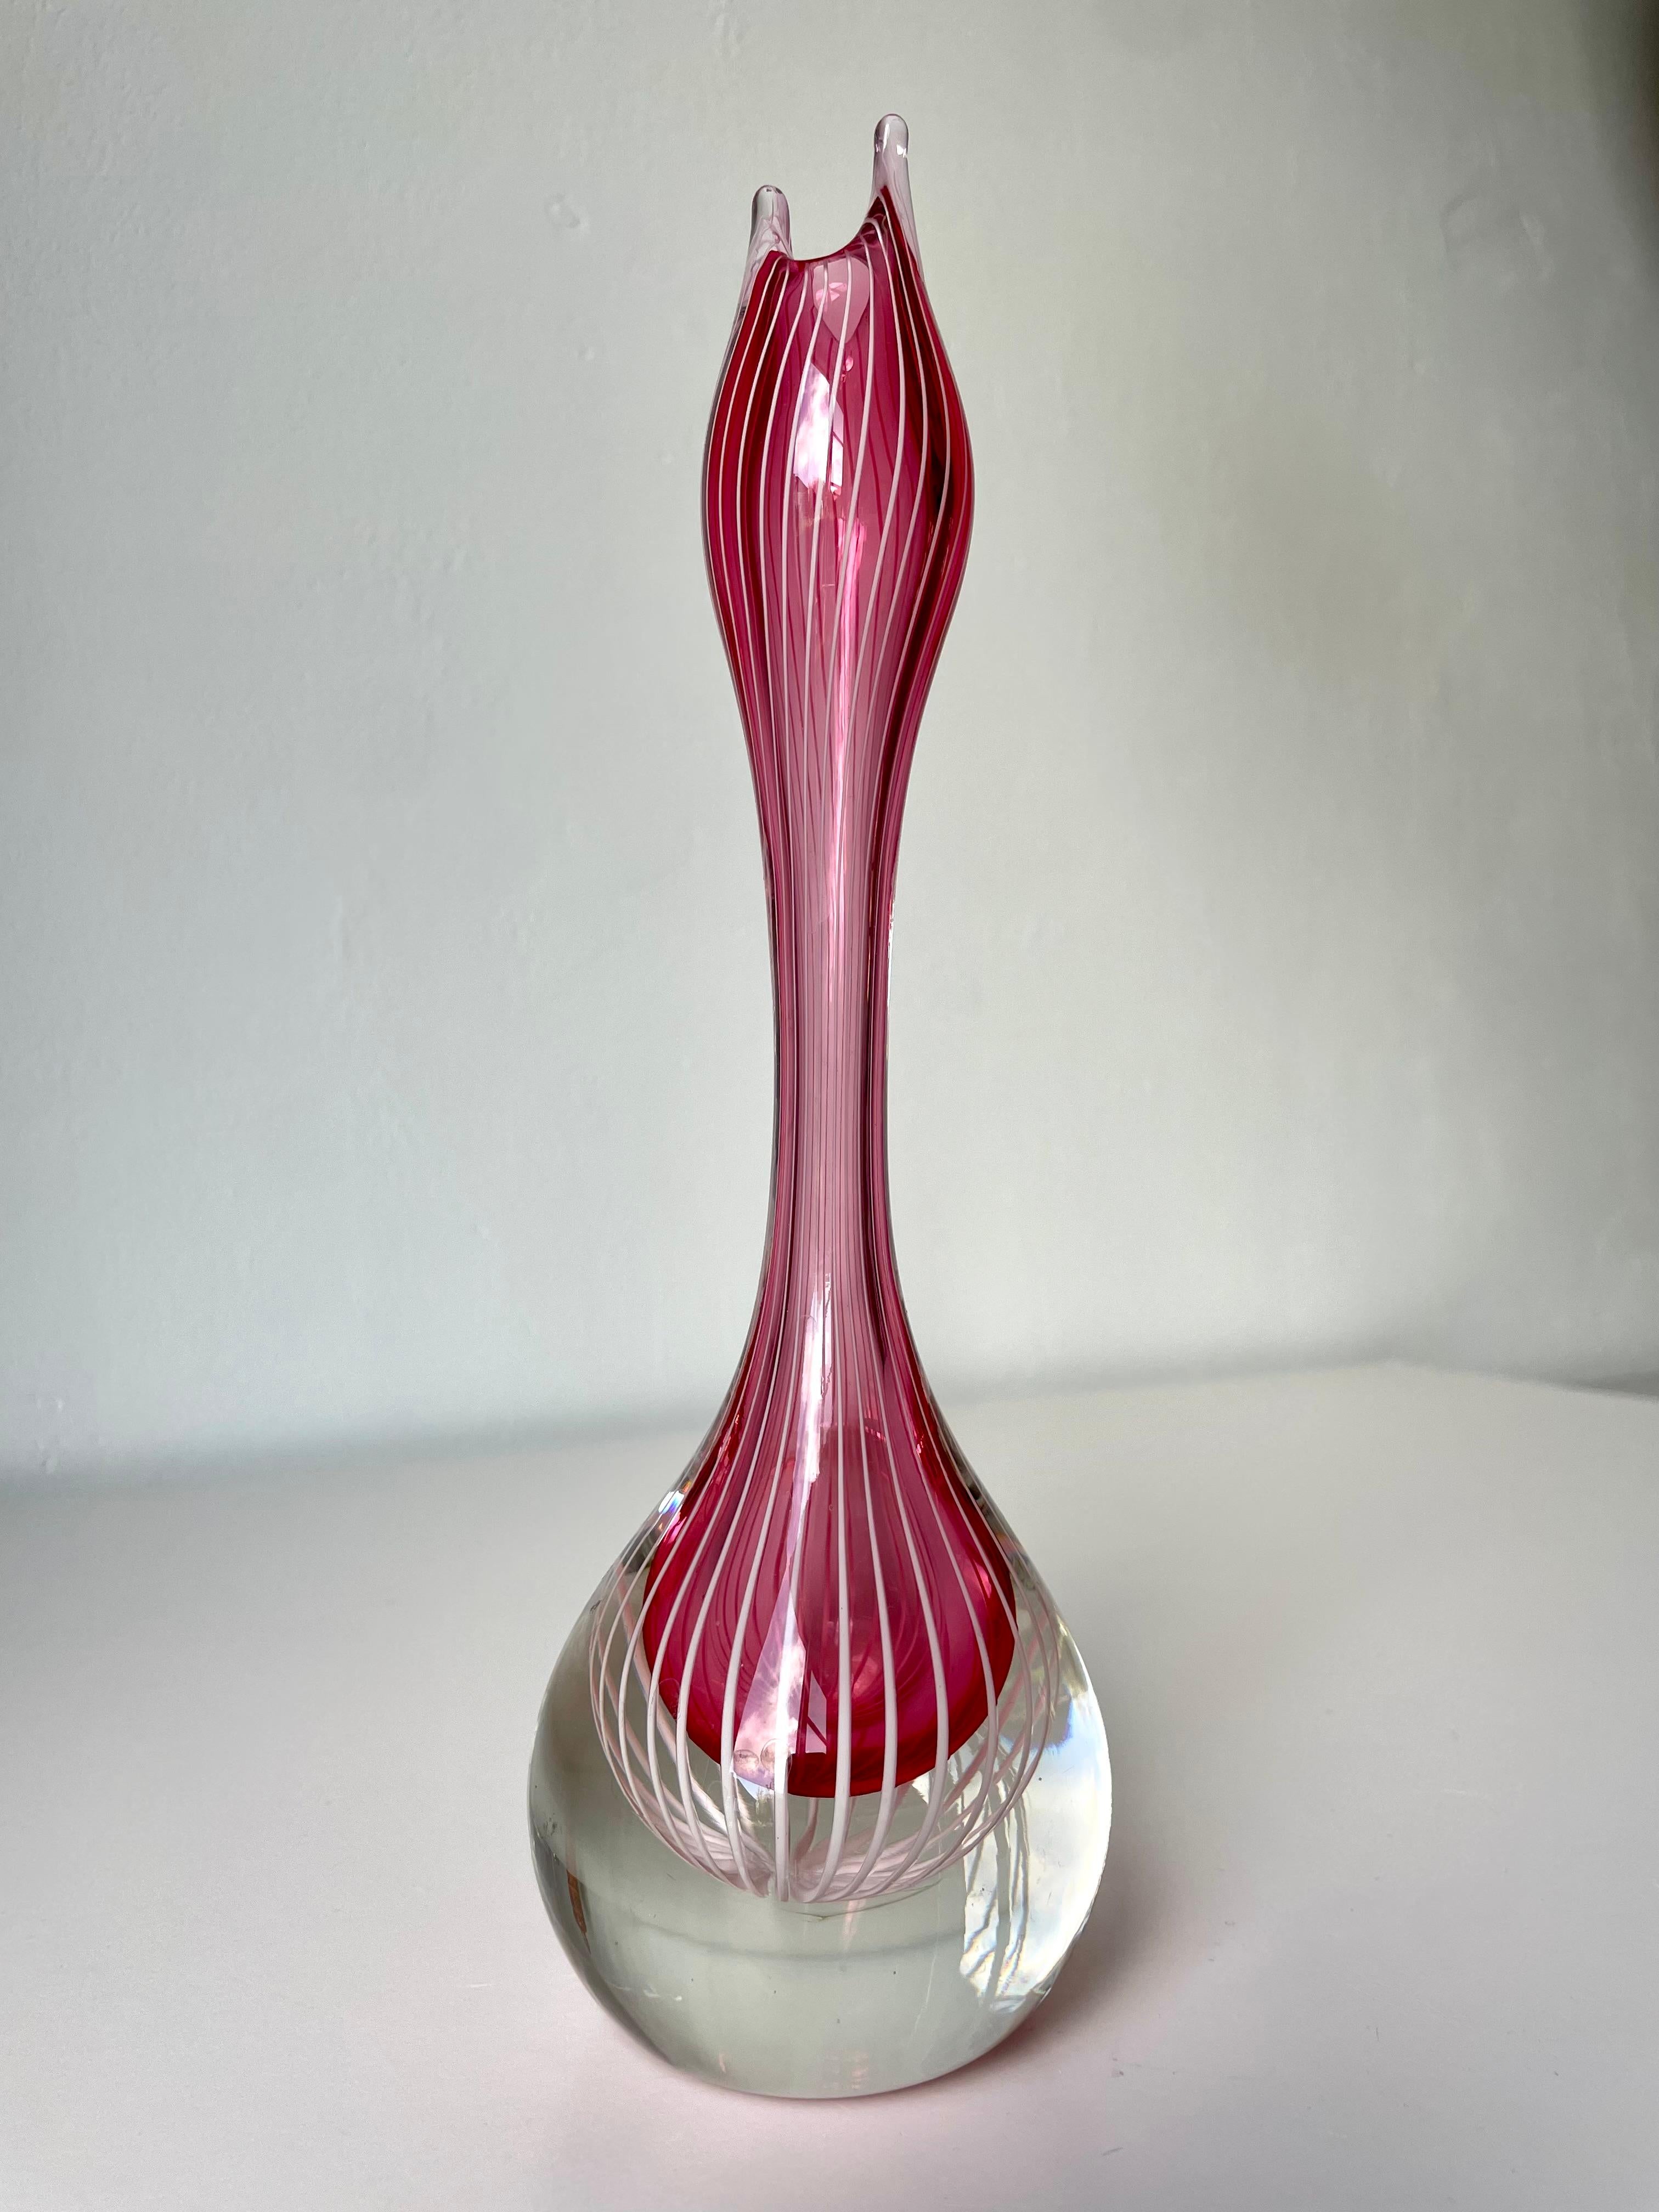 Elegant Swedish midcentury modern pink rose encased in clear art glass mouthblown Zebra vase with narrow white vertical lines. Flowing soft organic shape with clear round base, slender long body and tulip like asymmetrical opening. Designed and